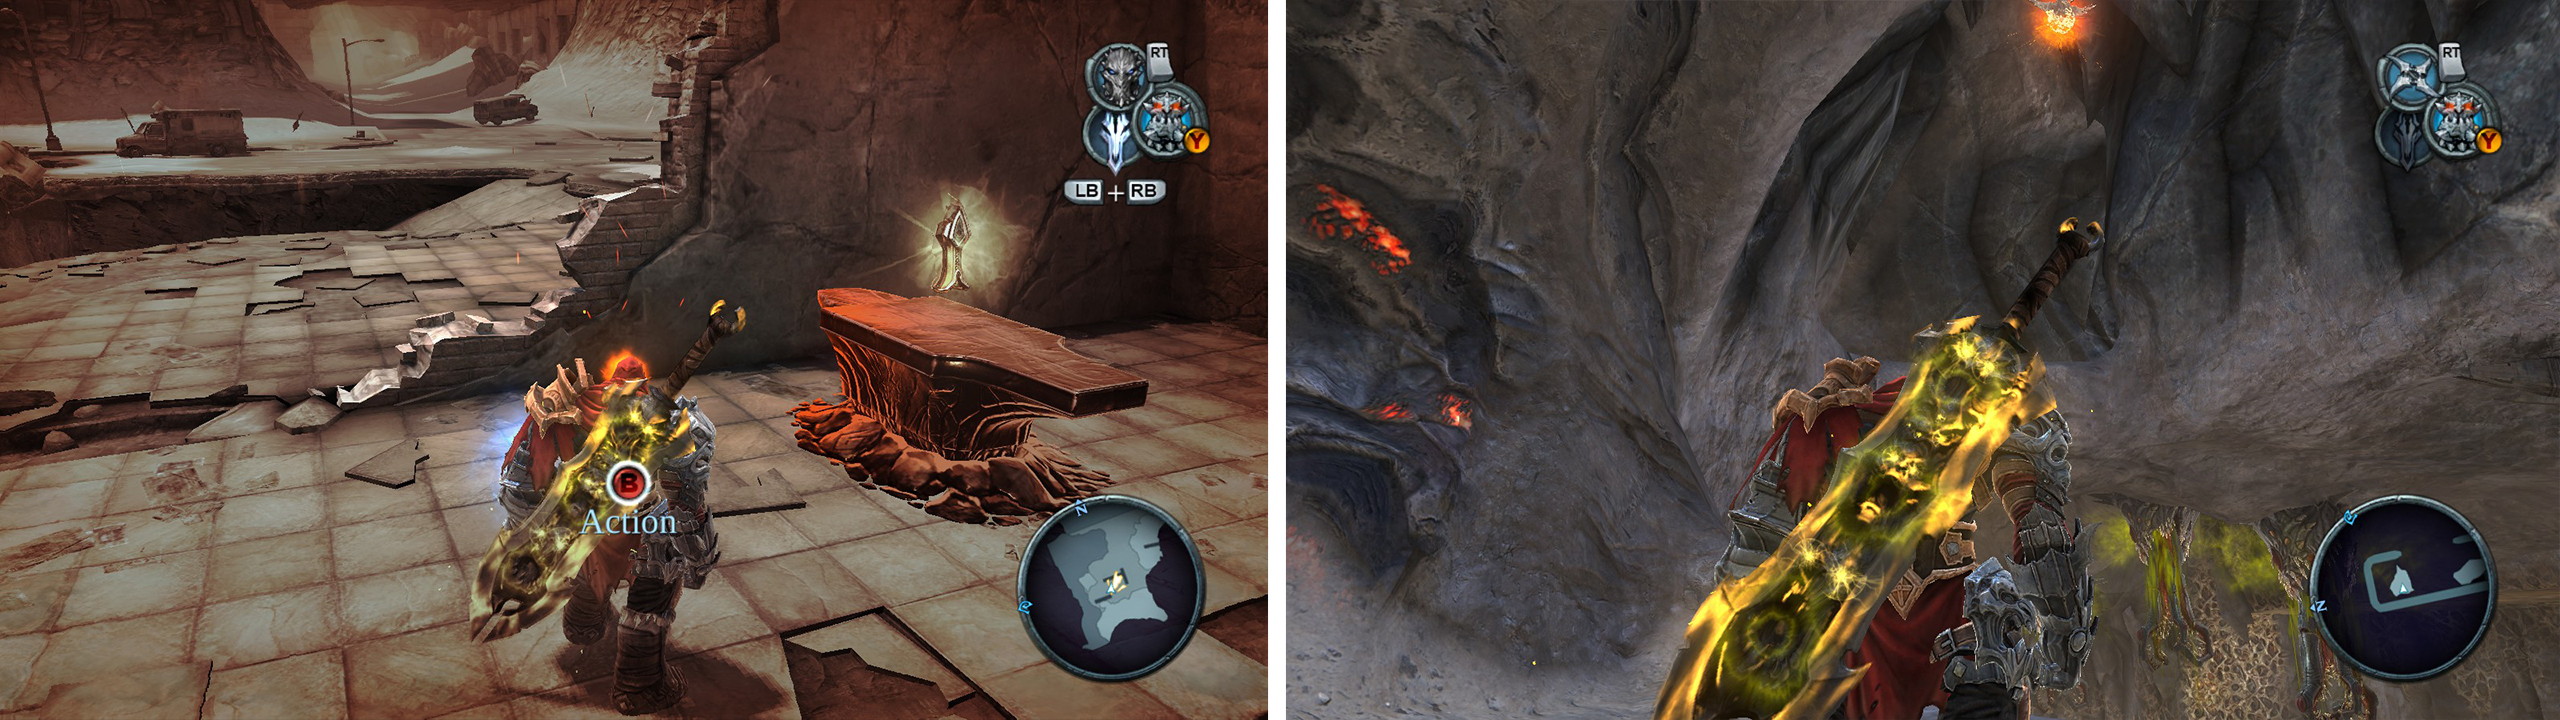 In the ruins to the left of the road is an Armageddon Blade Shard (left). On the road to the Ash Lands, in the room with the Demonic Plants, look for the grapple point (right) leading to a Wrath Shard.